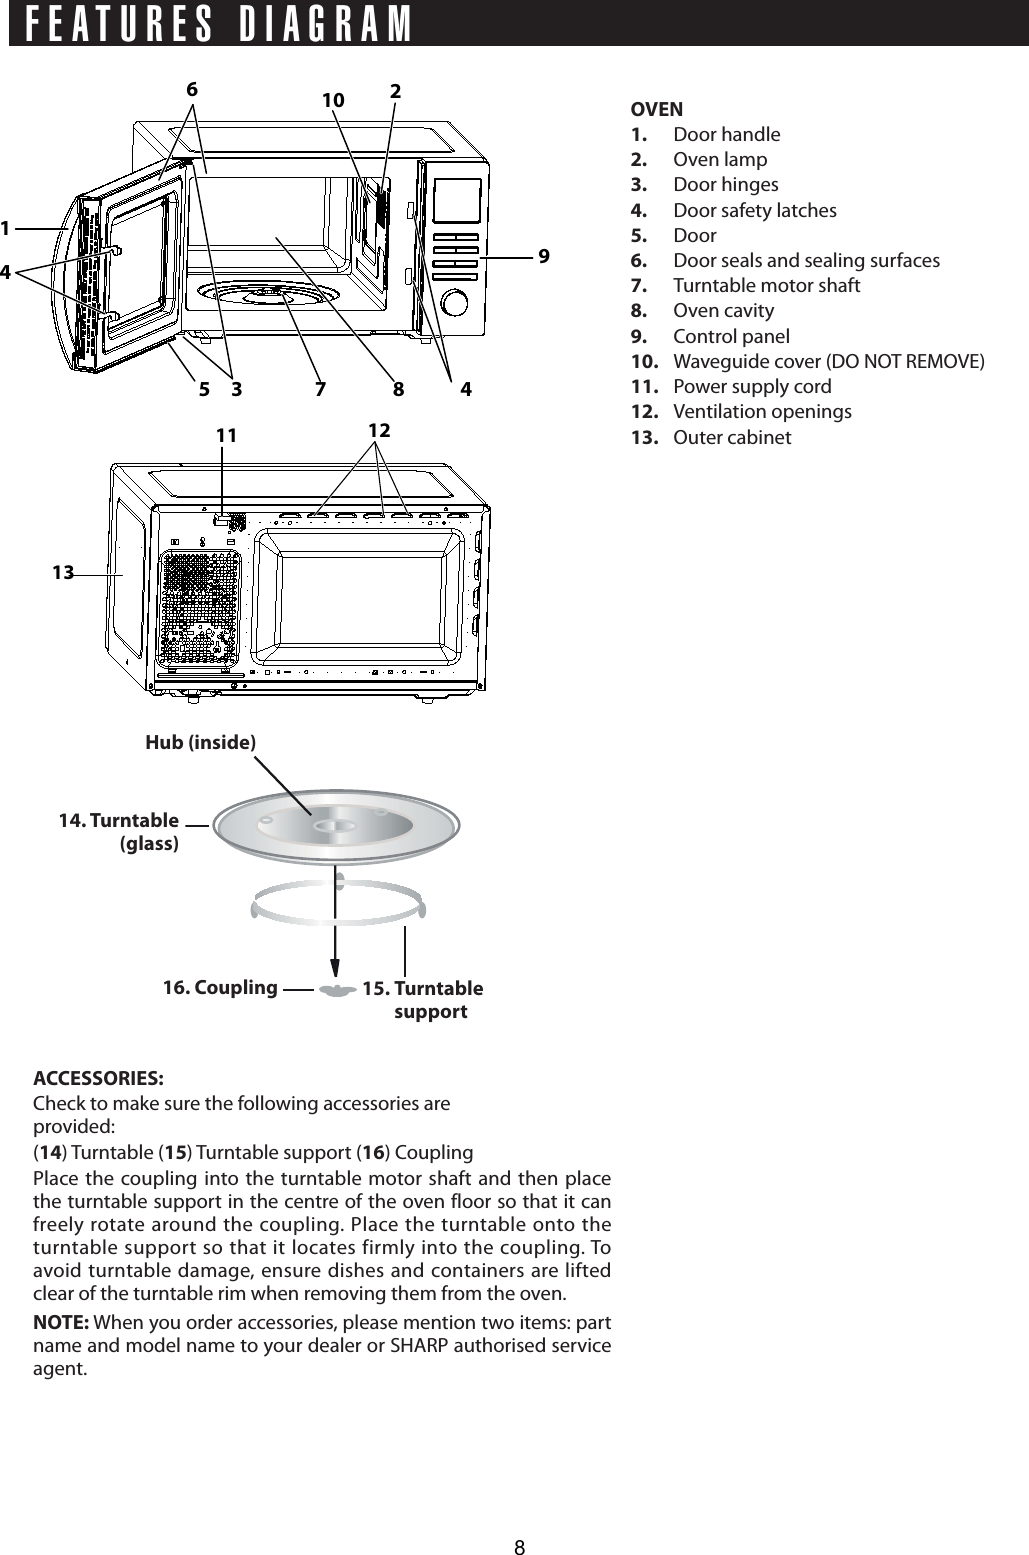 FEATURES DIAGRAMOVEN1.   Door handle2. Oven lamp 3. Door hinges4.   Door safety latches5.   Door  6.  Door seals and sealing surfaces7.  Turntable motor shaft8.   Oven cavity  9.   Control panel10.   Waveguide cover (DO NOT REMOVE)  11.  Power supply cord12. Ventilation openings13. Outer cabinetACCESSORIES:Check to make sure the following accessories areprovided:(14) Turntable (15) Turntable support (16) CouplingPlace the coupling into the turntable motor shaft and then place the turntable support in the centre of the oven floor so that it can freely rotate around the coupling. Place the turntable onto the turntable support so that it locates firmly into the coupling. To avoid turntable damage, ensure dishes and containers are lifted clear of the turntable rim when removing them from the oven. NOTE: When you order accessories, please mention two items: part name and model name to your dealer or SHARP authorised service agent.Hub (inside)14. Turntable(glass)16. Coupling 15. Turntable support8121113487359621014